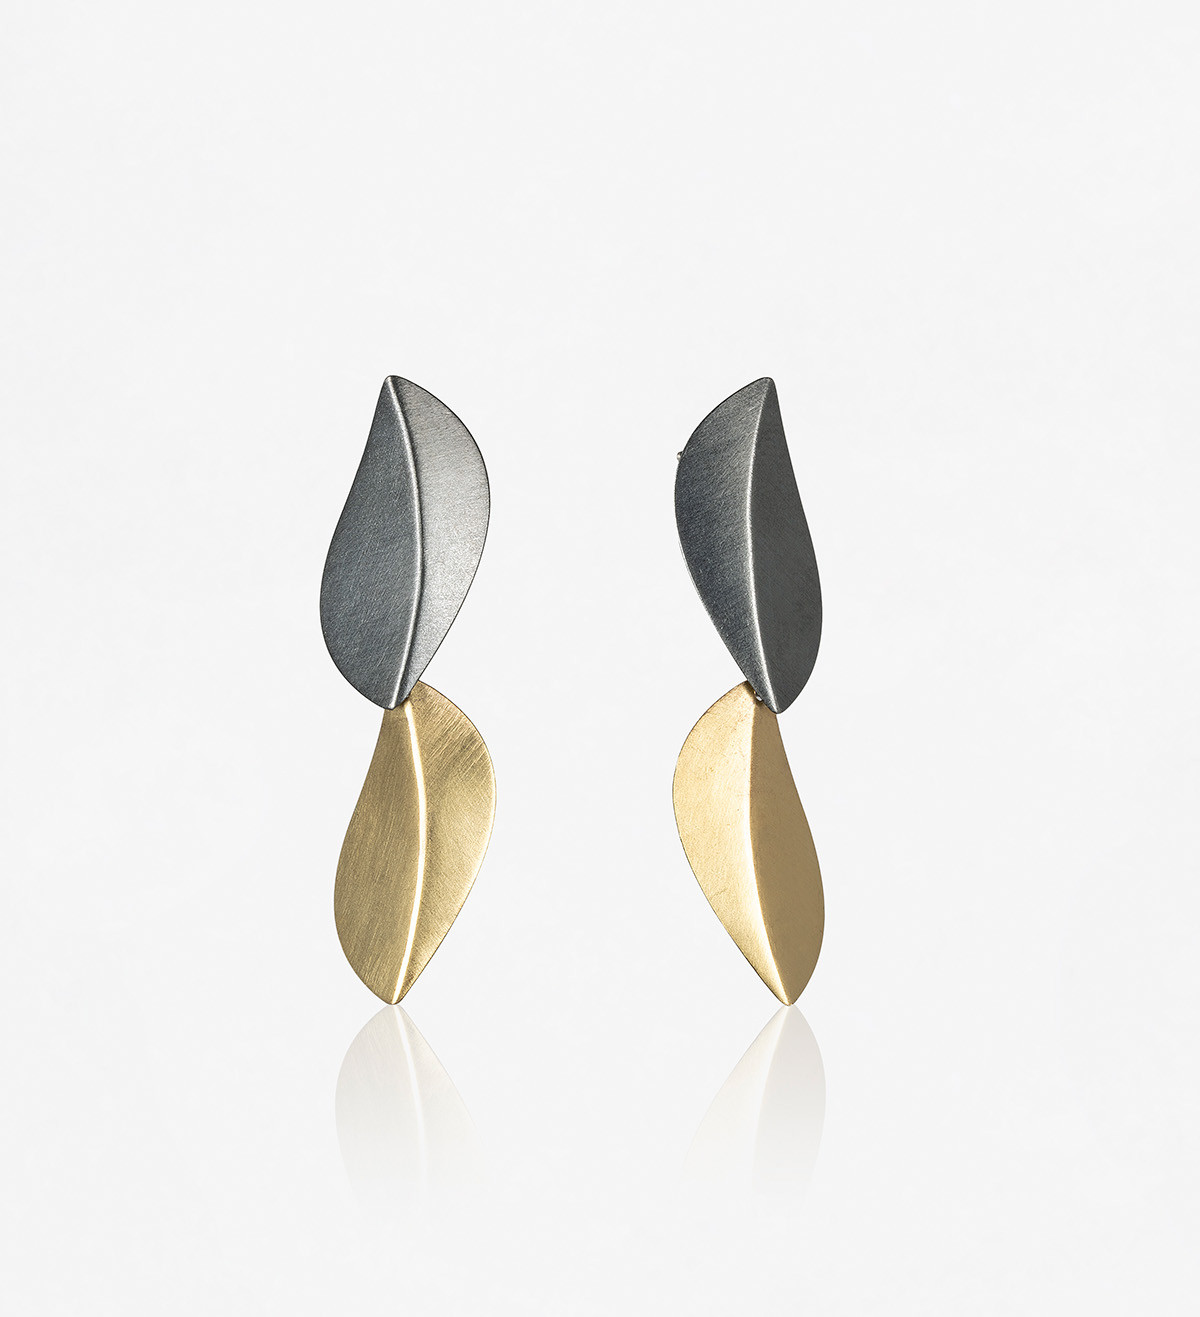 18k gold and silver earrings Creta 2 pieces 45mm